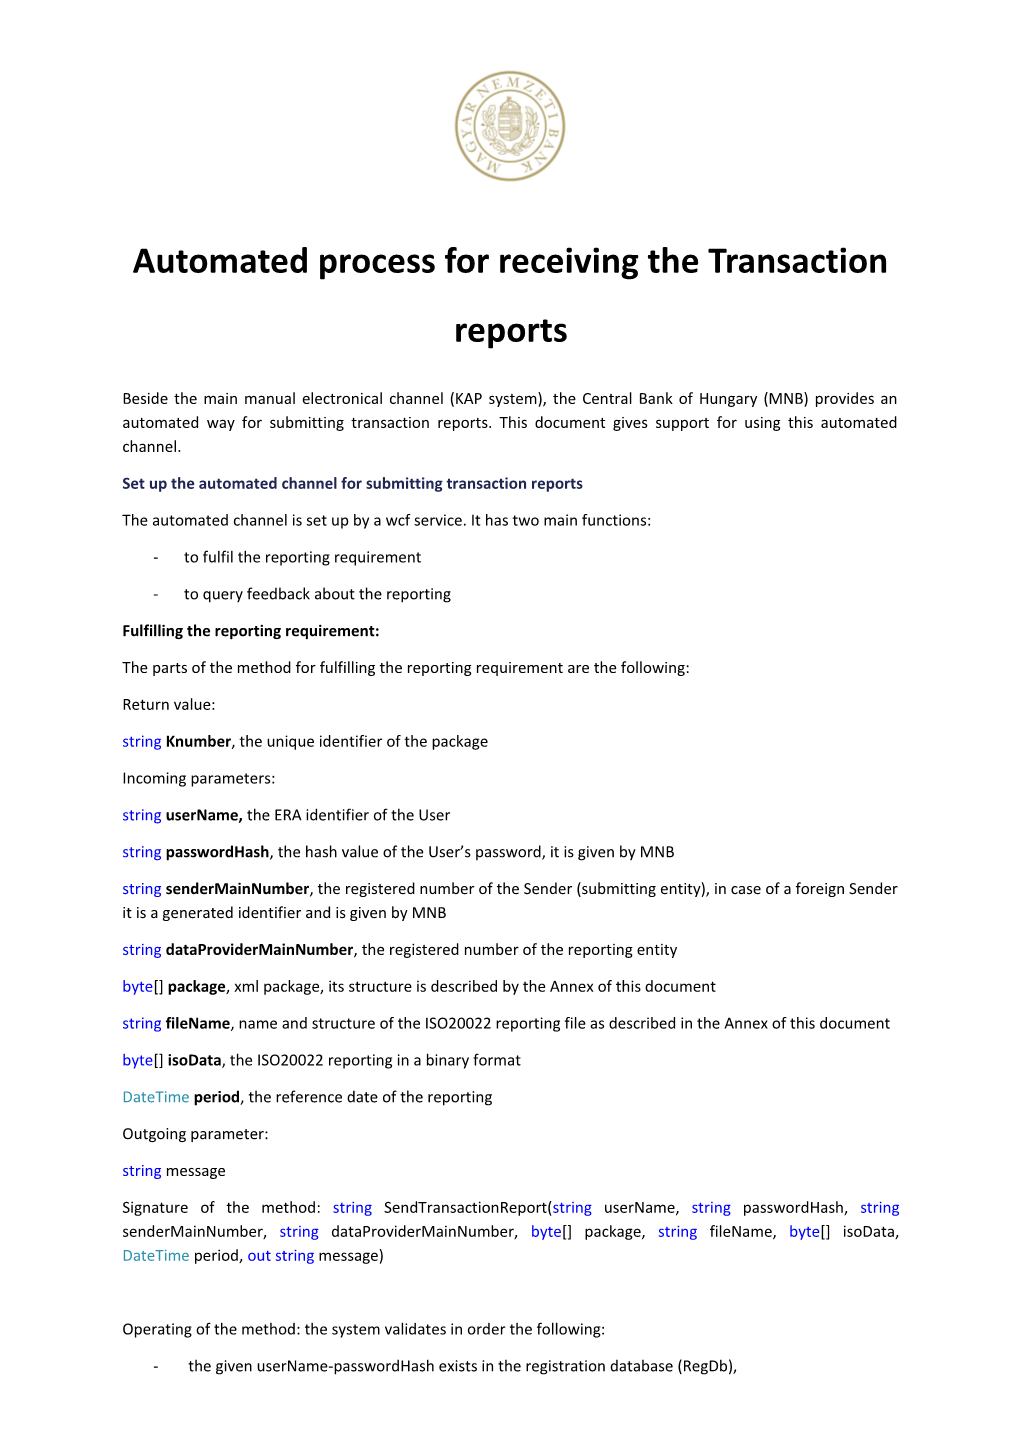 Automated Process for Receiving the Transaction Reports